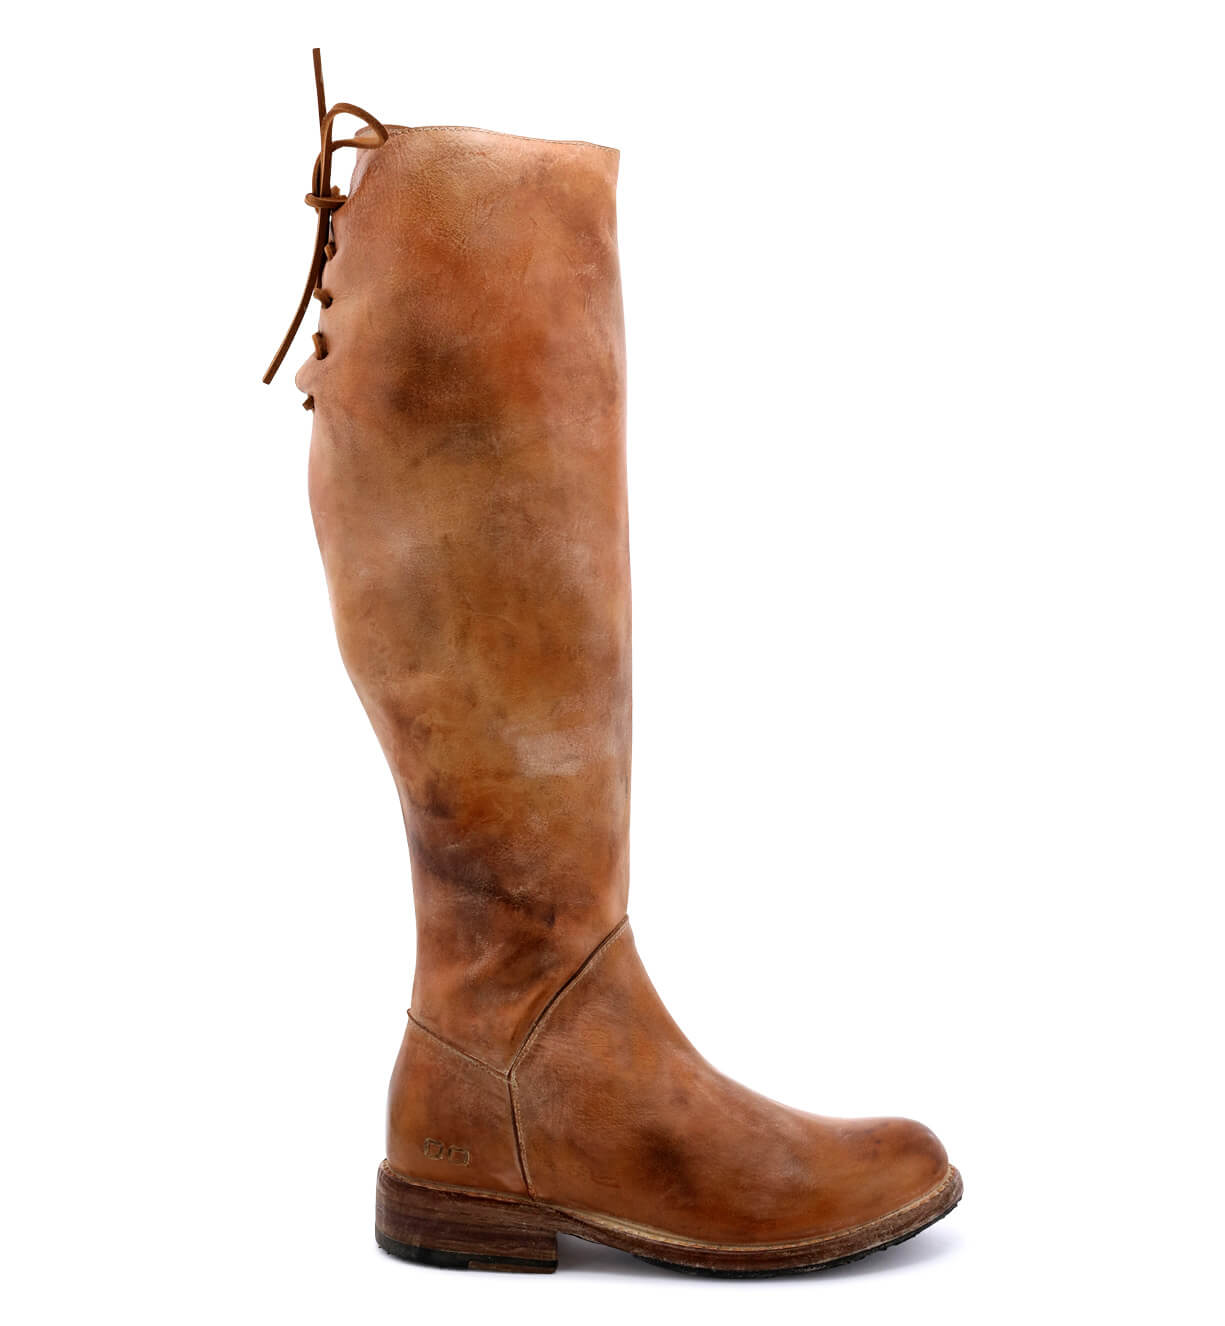 A women's brown leather boot with laces, the Manchester boot by Bed Stu.